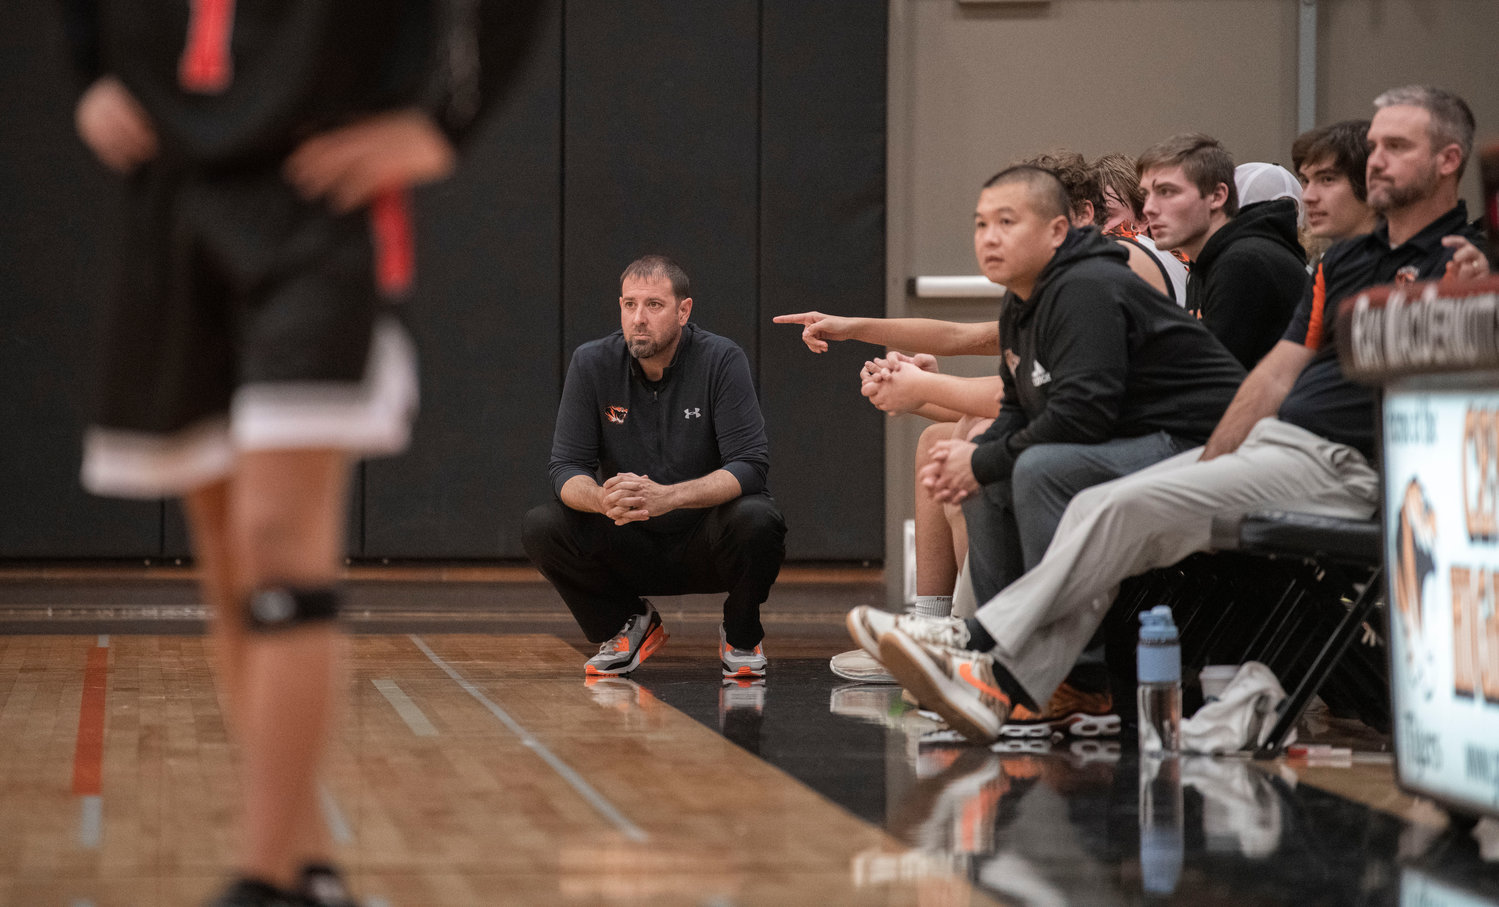 Centralia Head Coach Kyle Donahue watches the action during a game against Oakville.